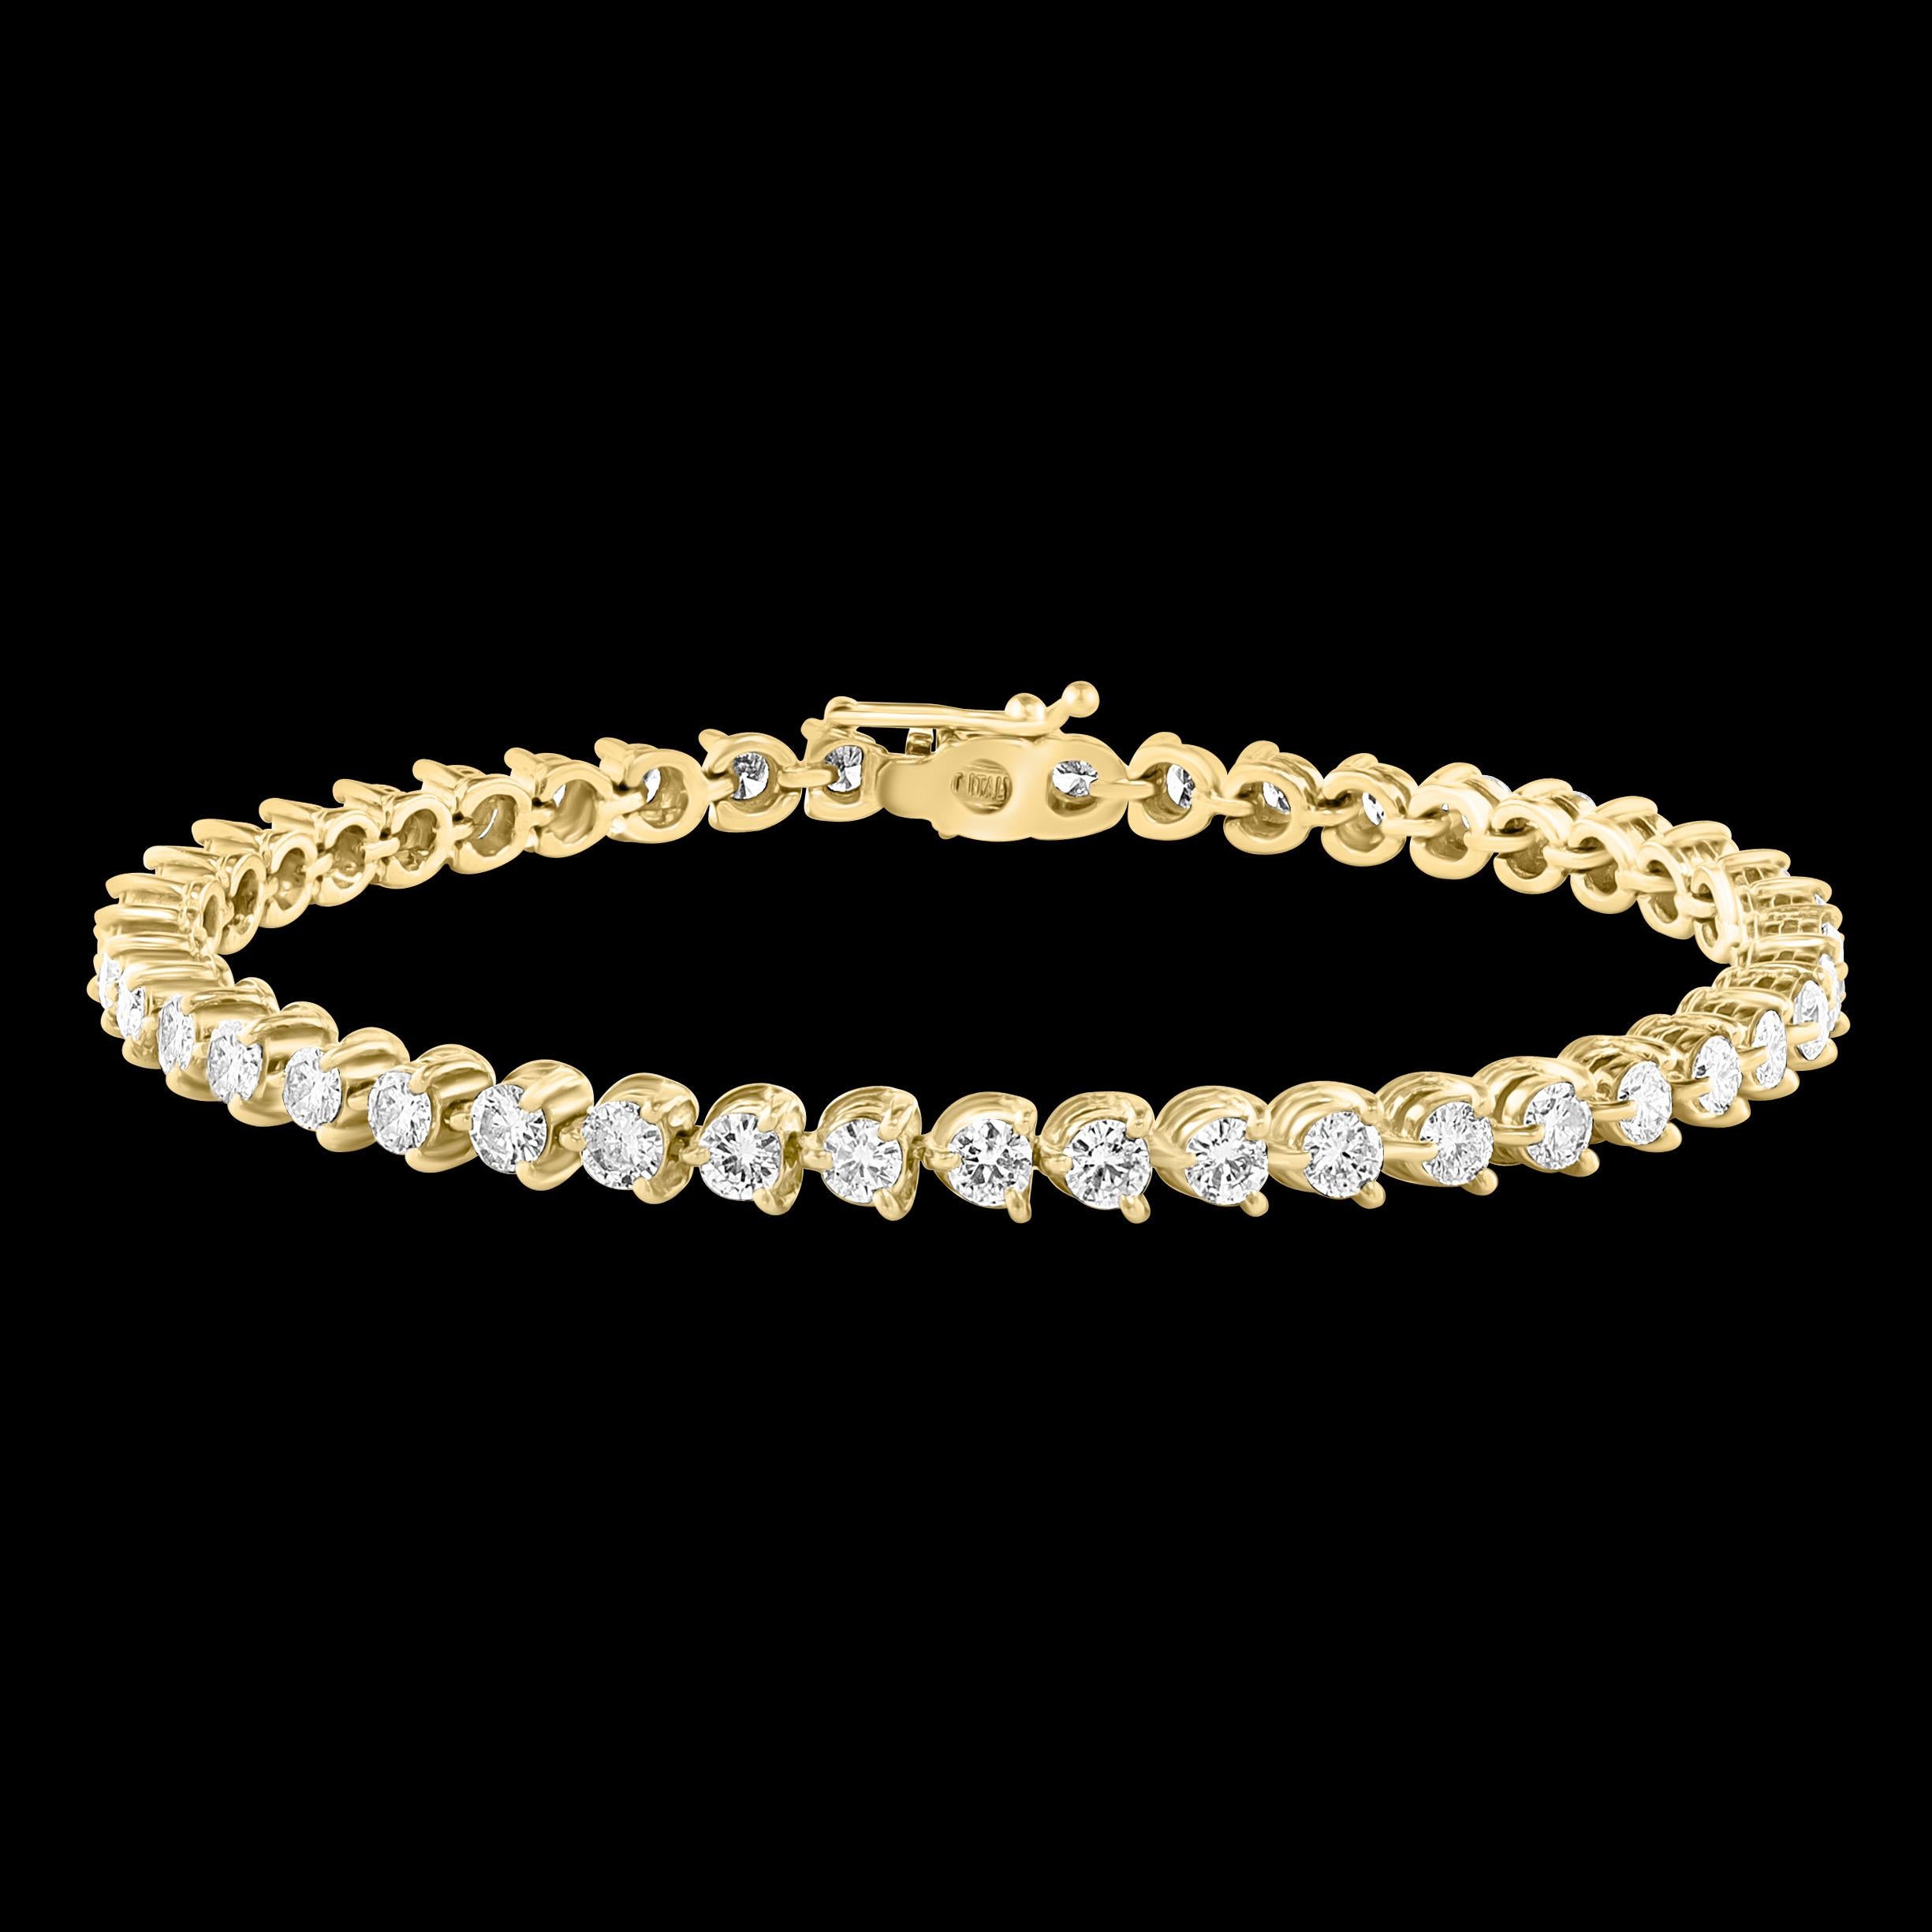 
44 Round Diamond 10-12 Pointer Each Tennis Bracelet in 14 K Yellow Gold 5.0 Carat  Line Bracelet, Made in Italy
Meet the ultimate bold tennis bracelet. The single row of prong set Round Brilliant cut Diamonds.
10-12 pointer each , 44 Total pieces